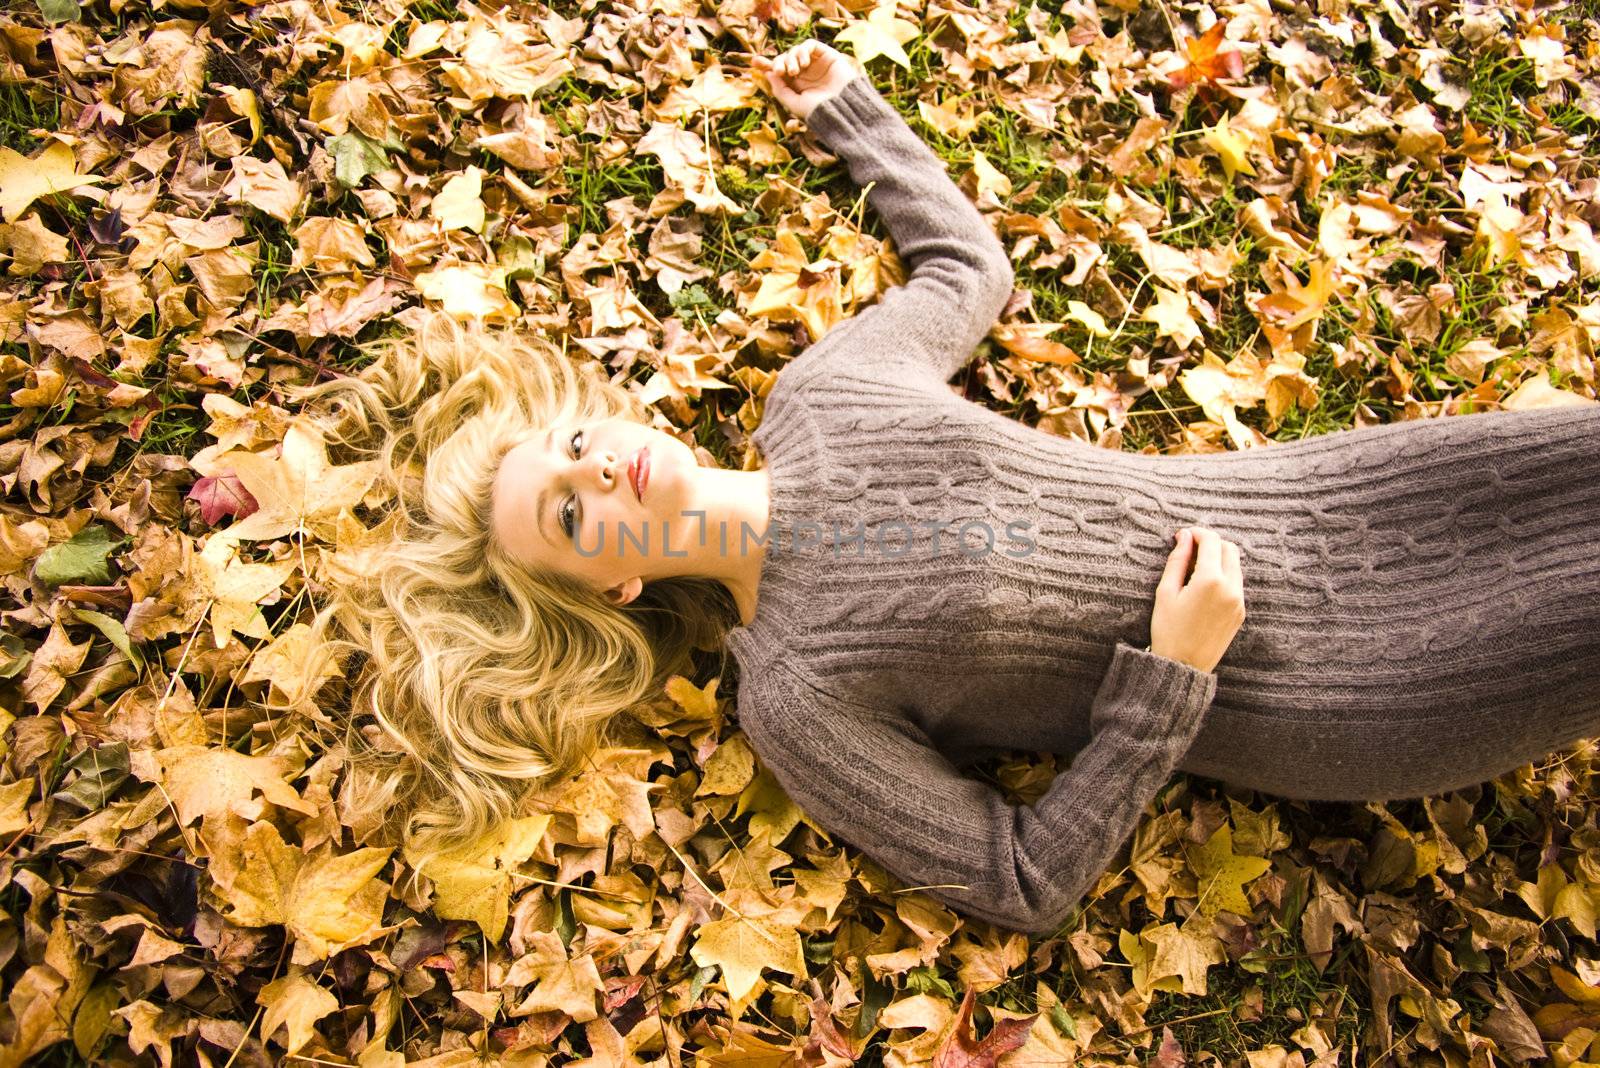 Young girl lying in the Autumn fall leaves